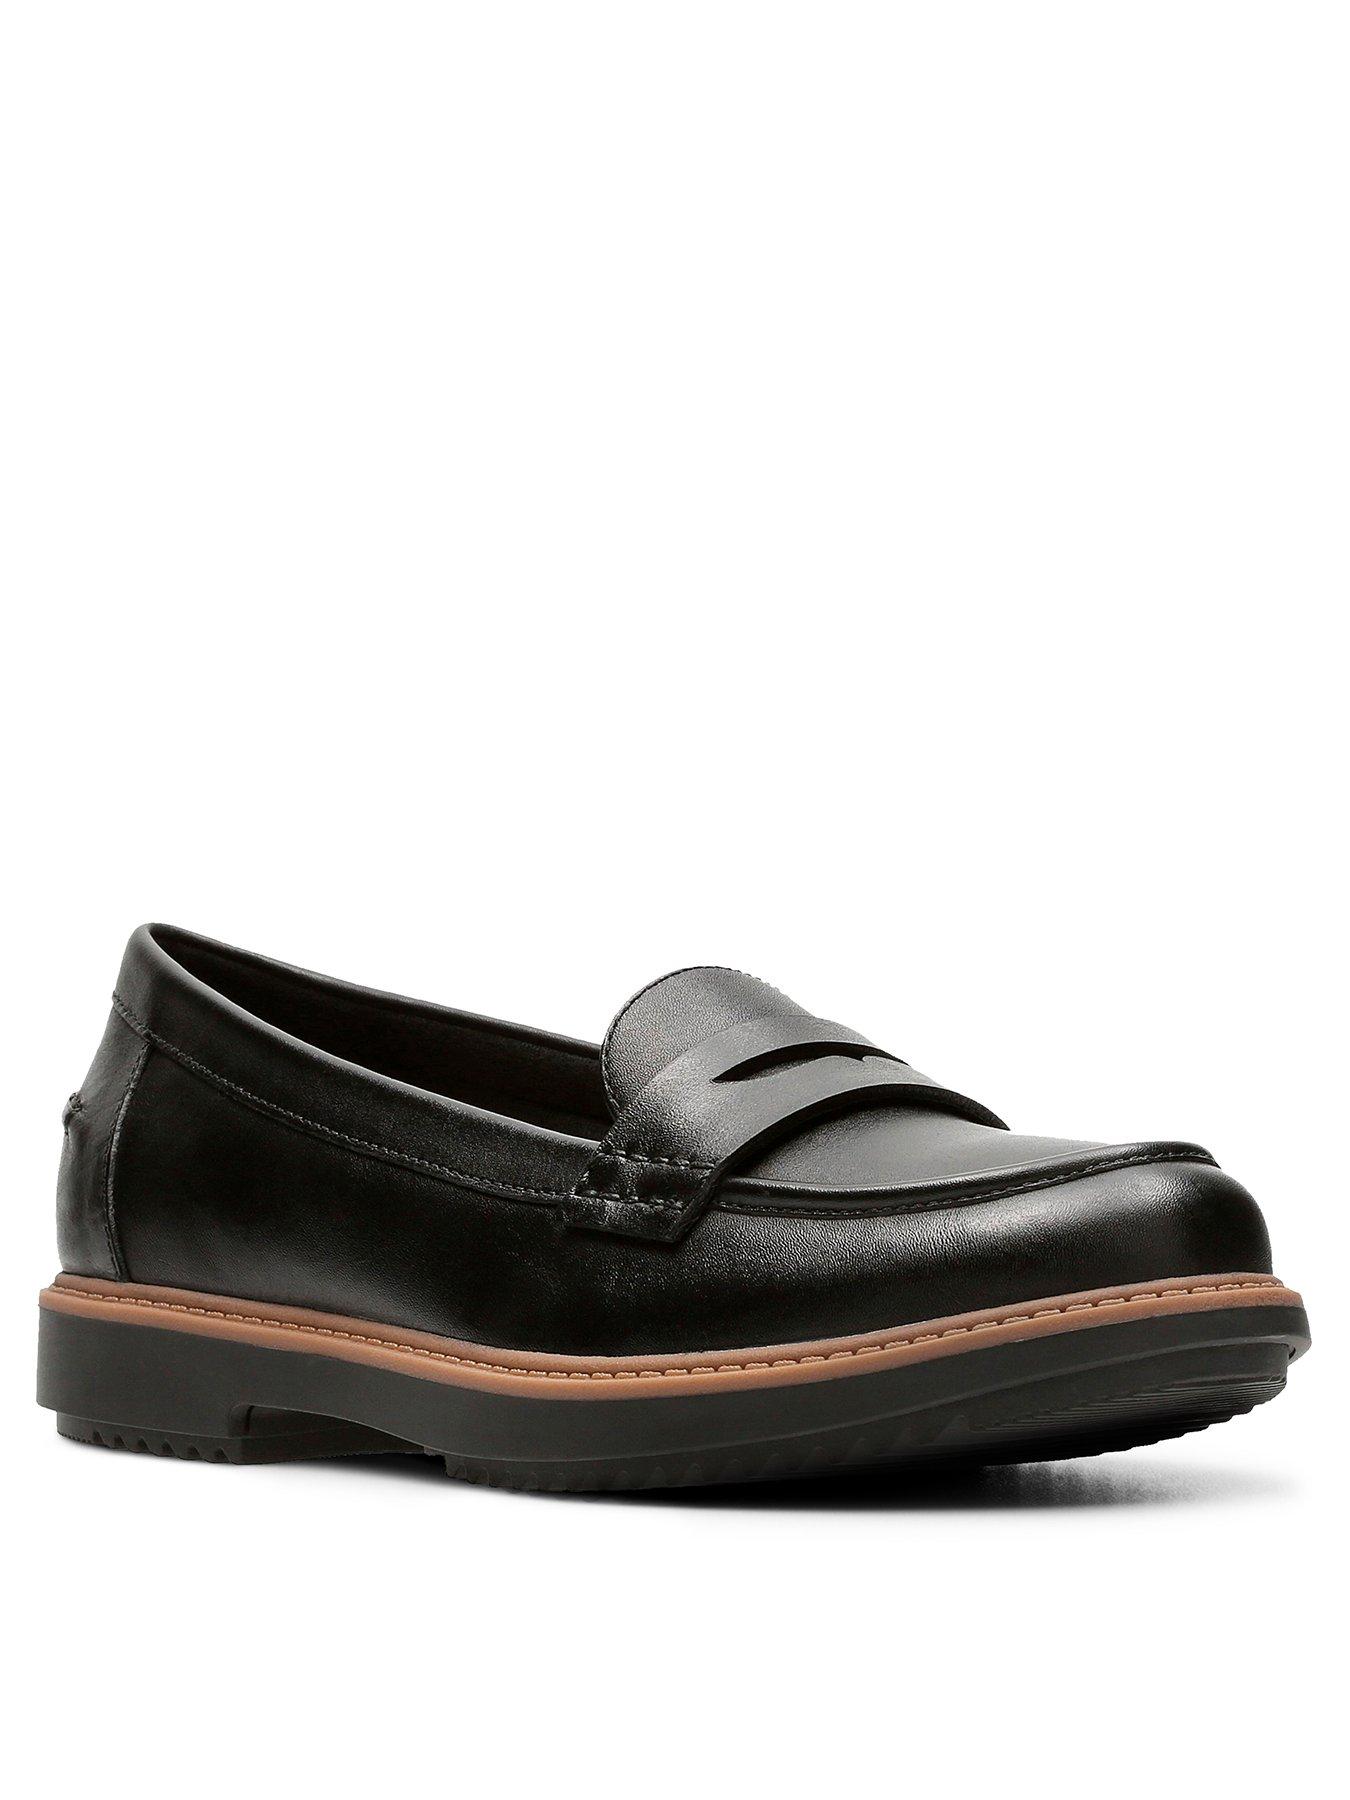 clarks womens flat shoes